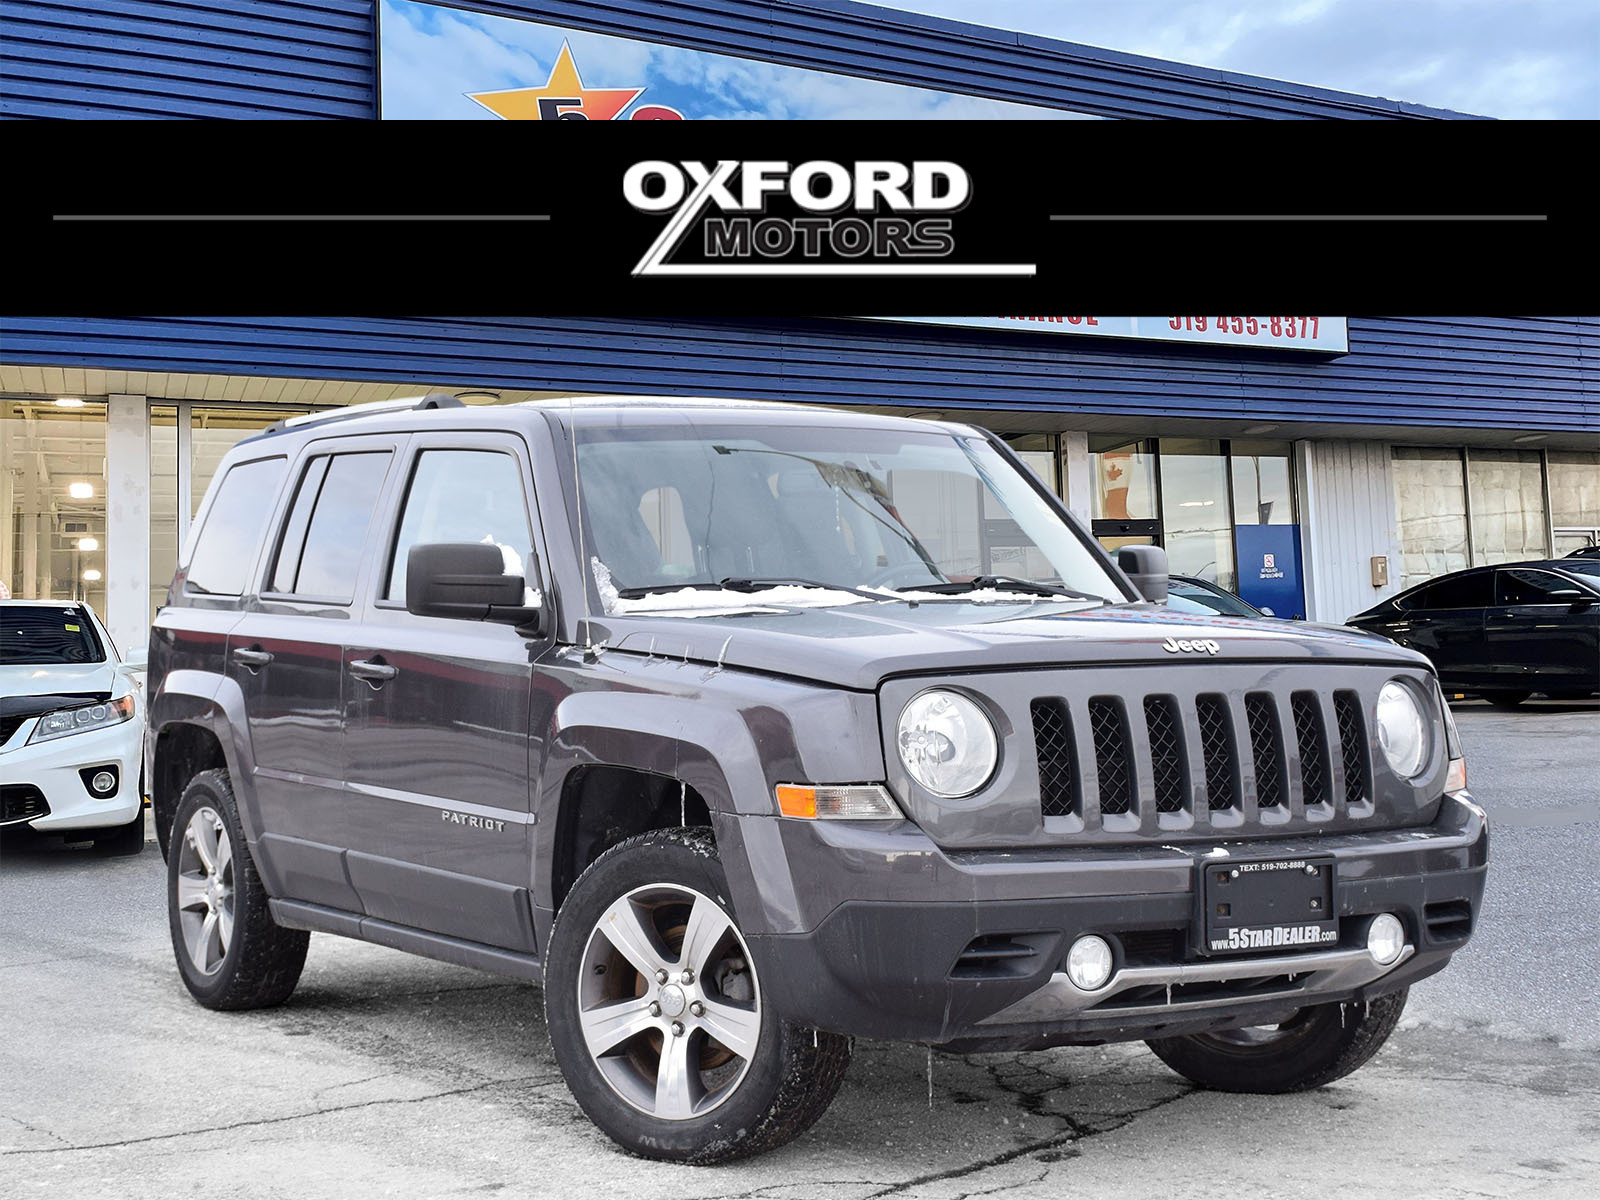 2016 Jeep Patriot AWD LEATHER SUNROOF LOADED! WE FINANCE ALL CREDIT!